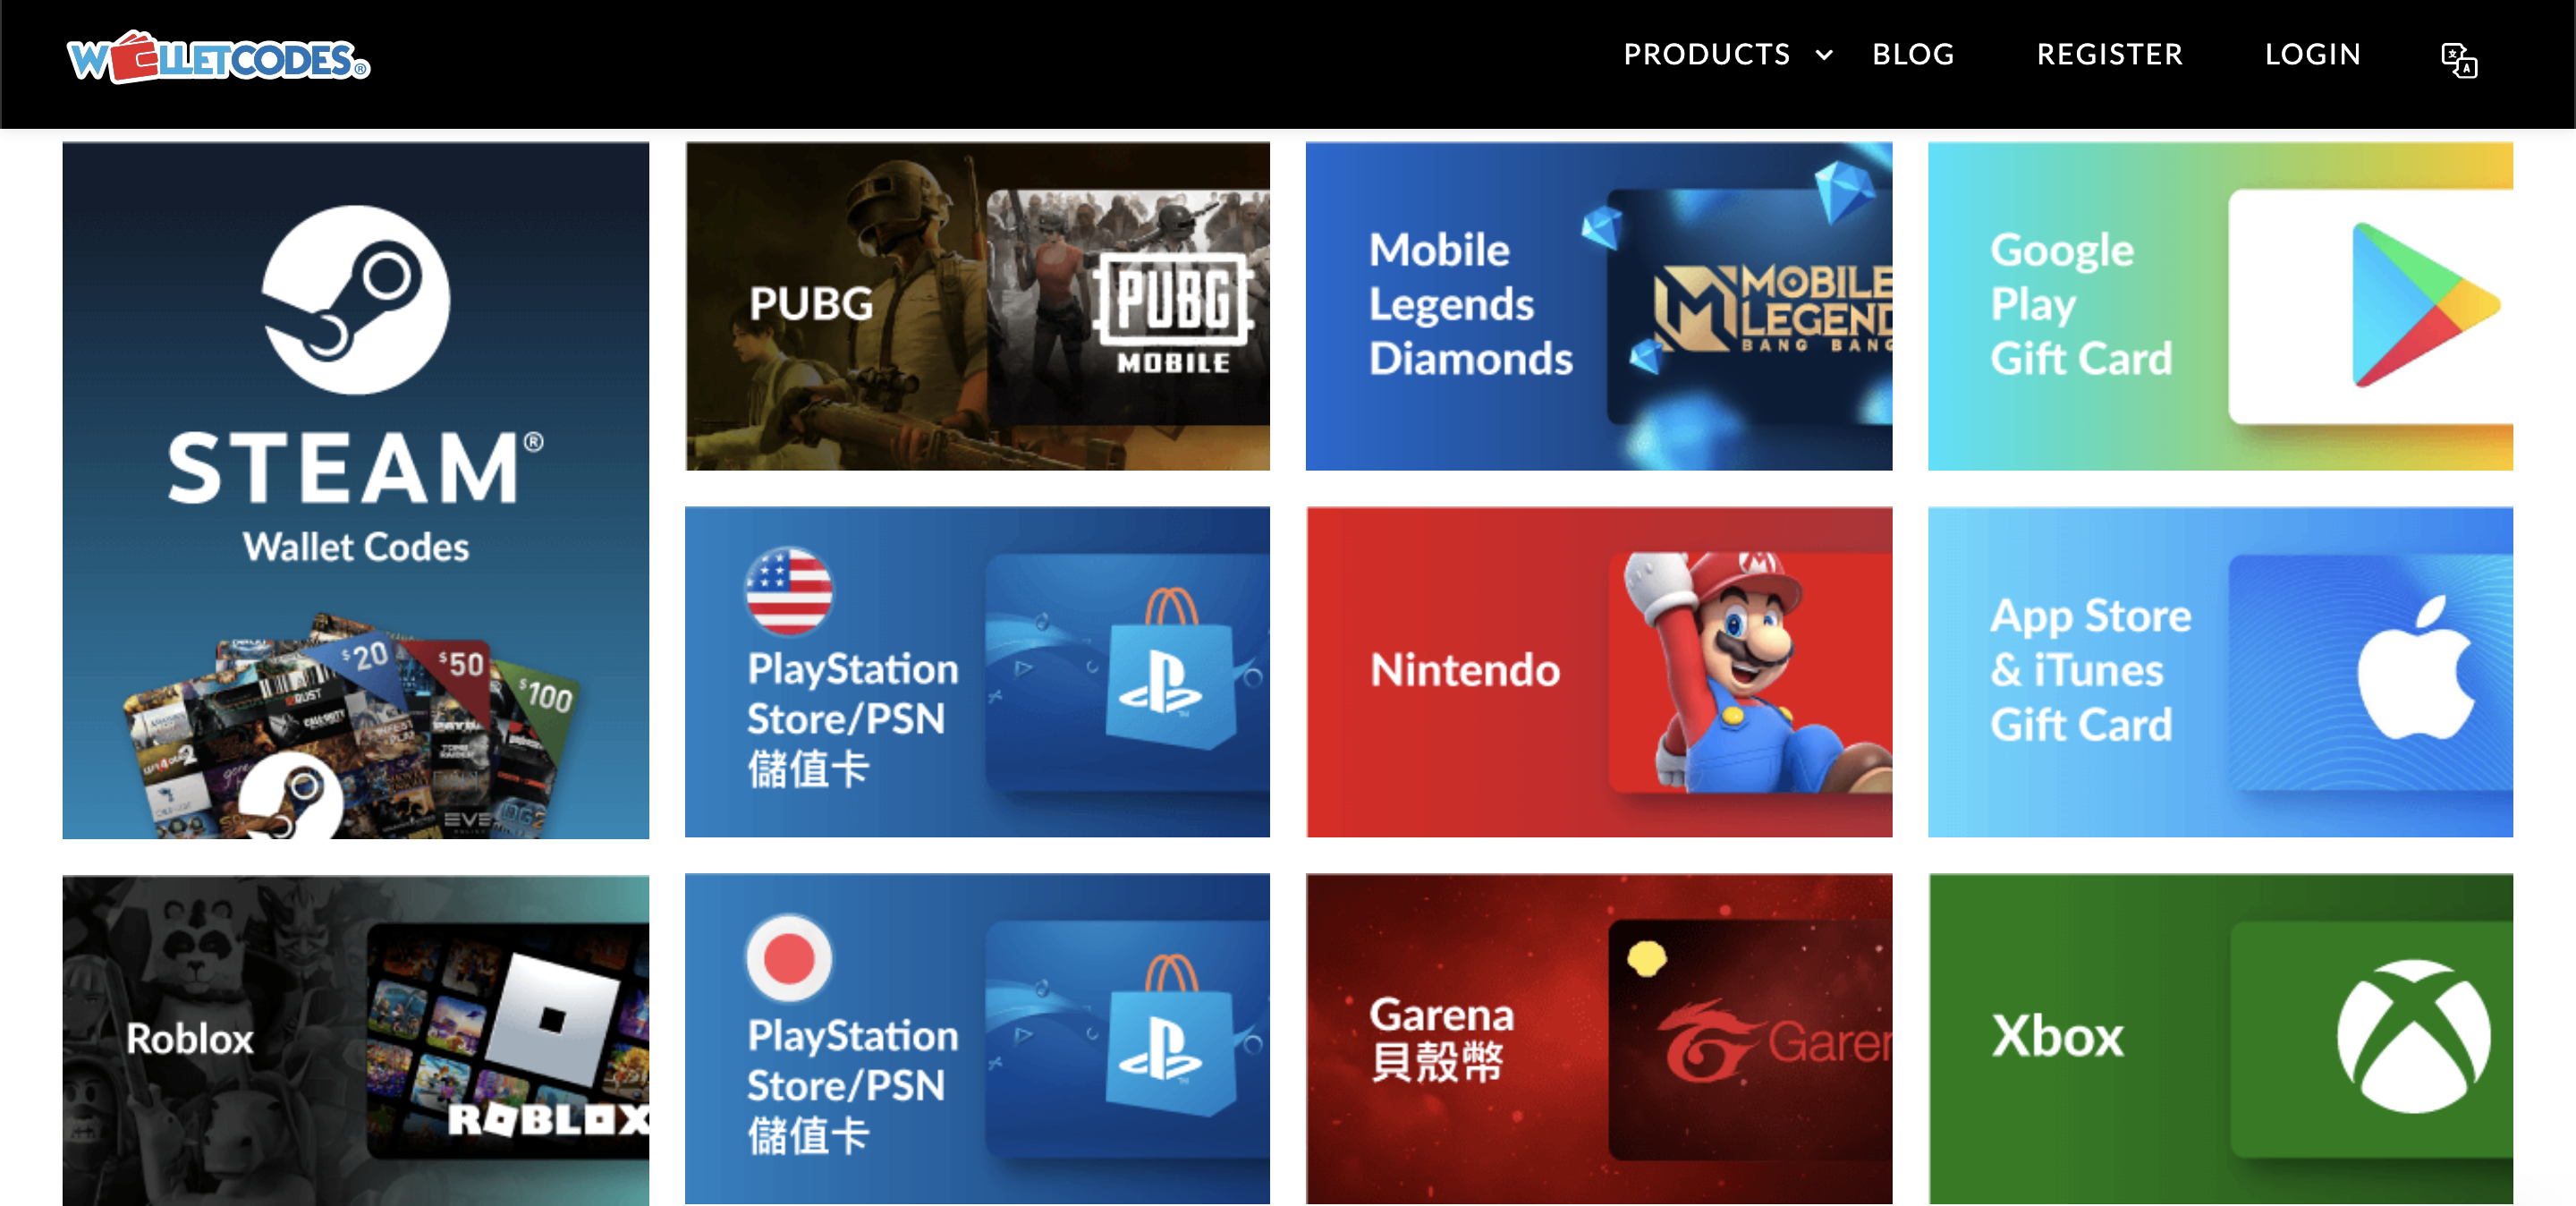 Wallet Codes Launches Roblox Gift Cards In Taiwan And The Philippines Forest Interactive - roblox gift card 7 eleven malaysia